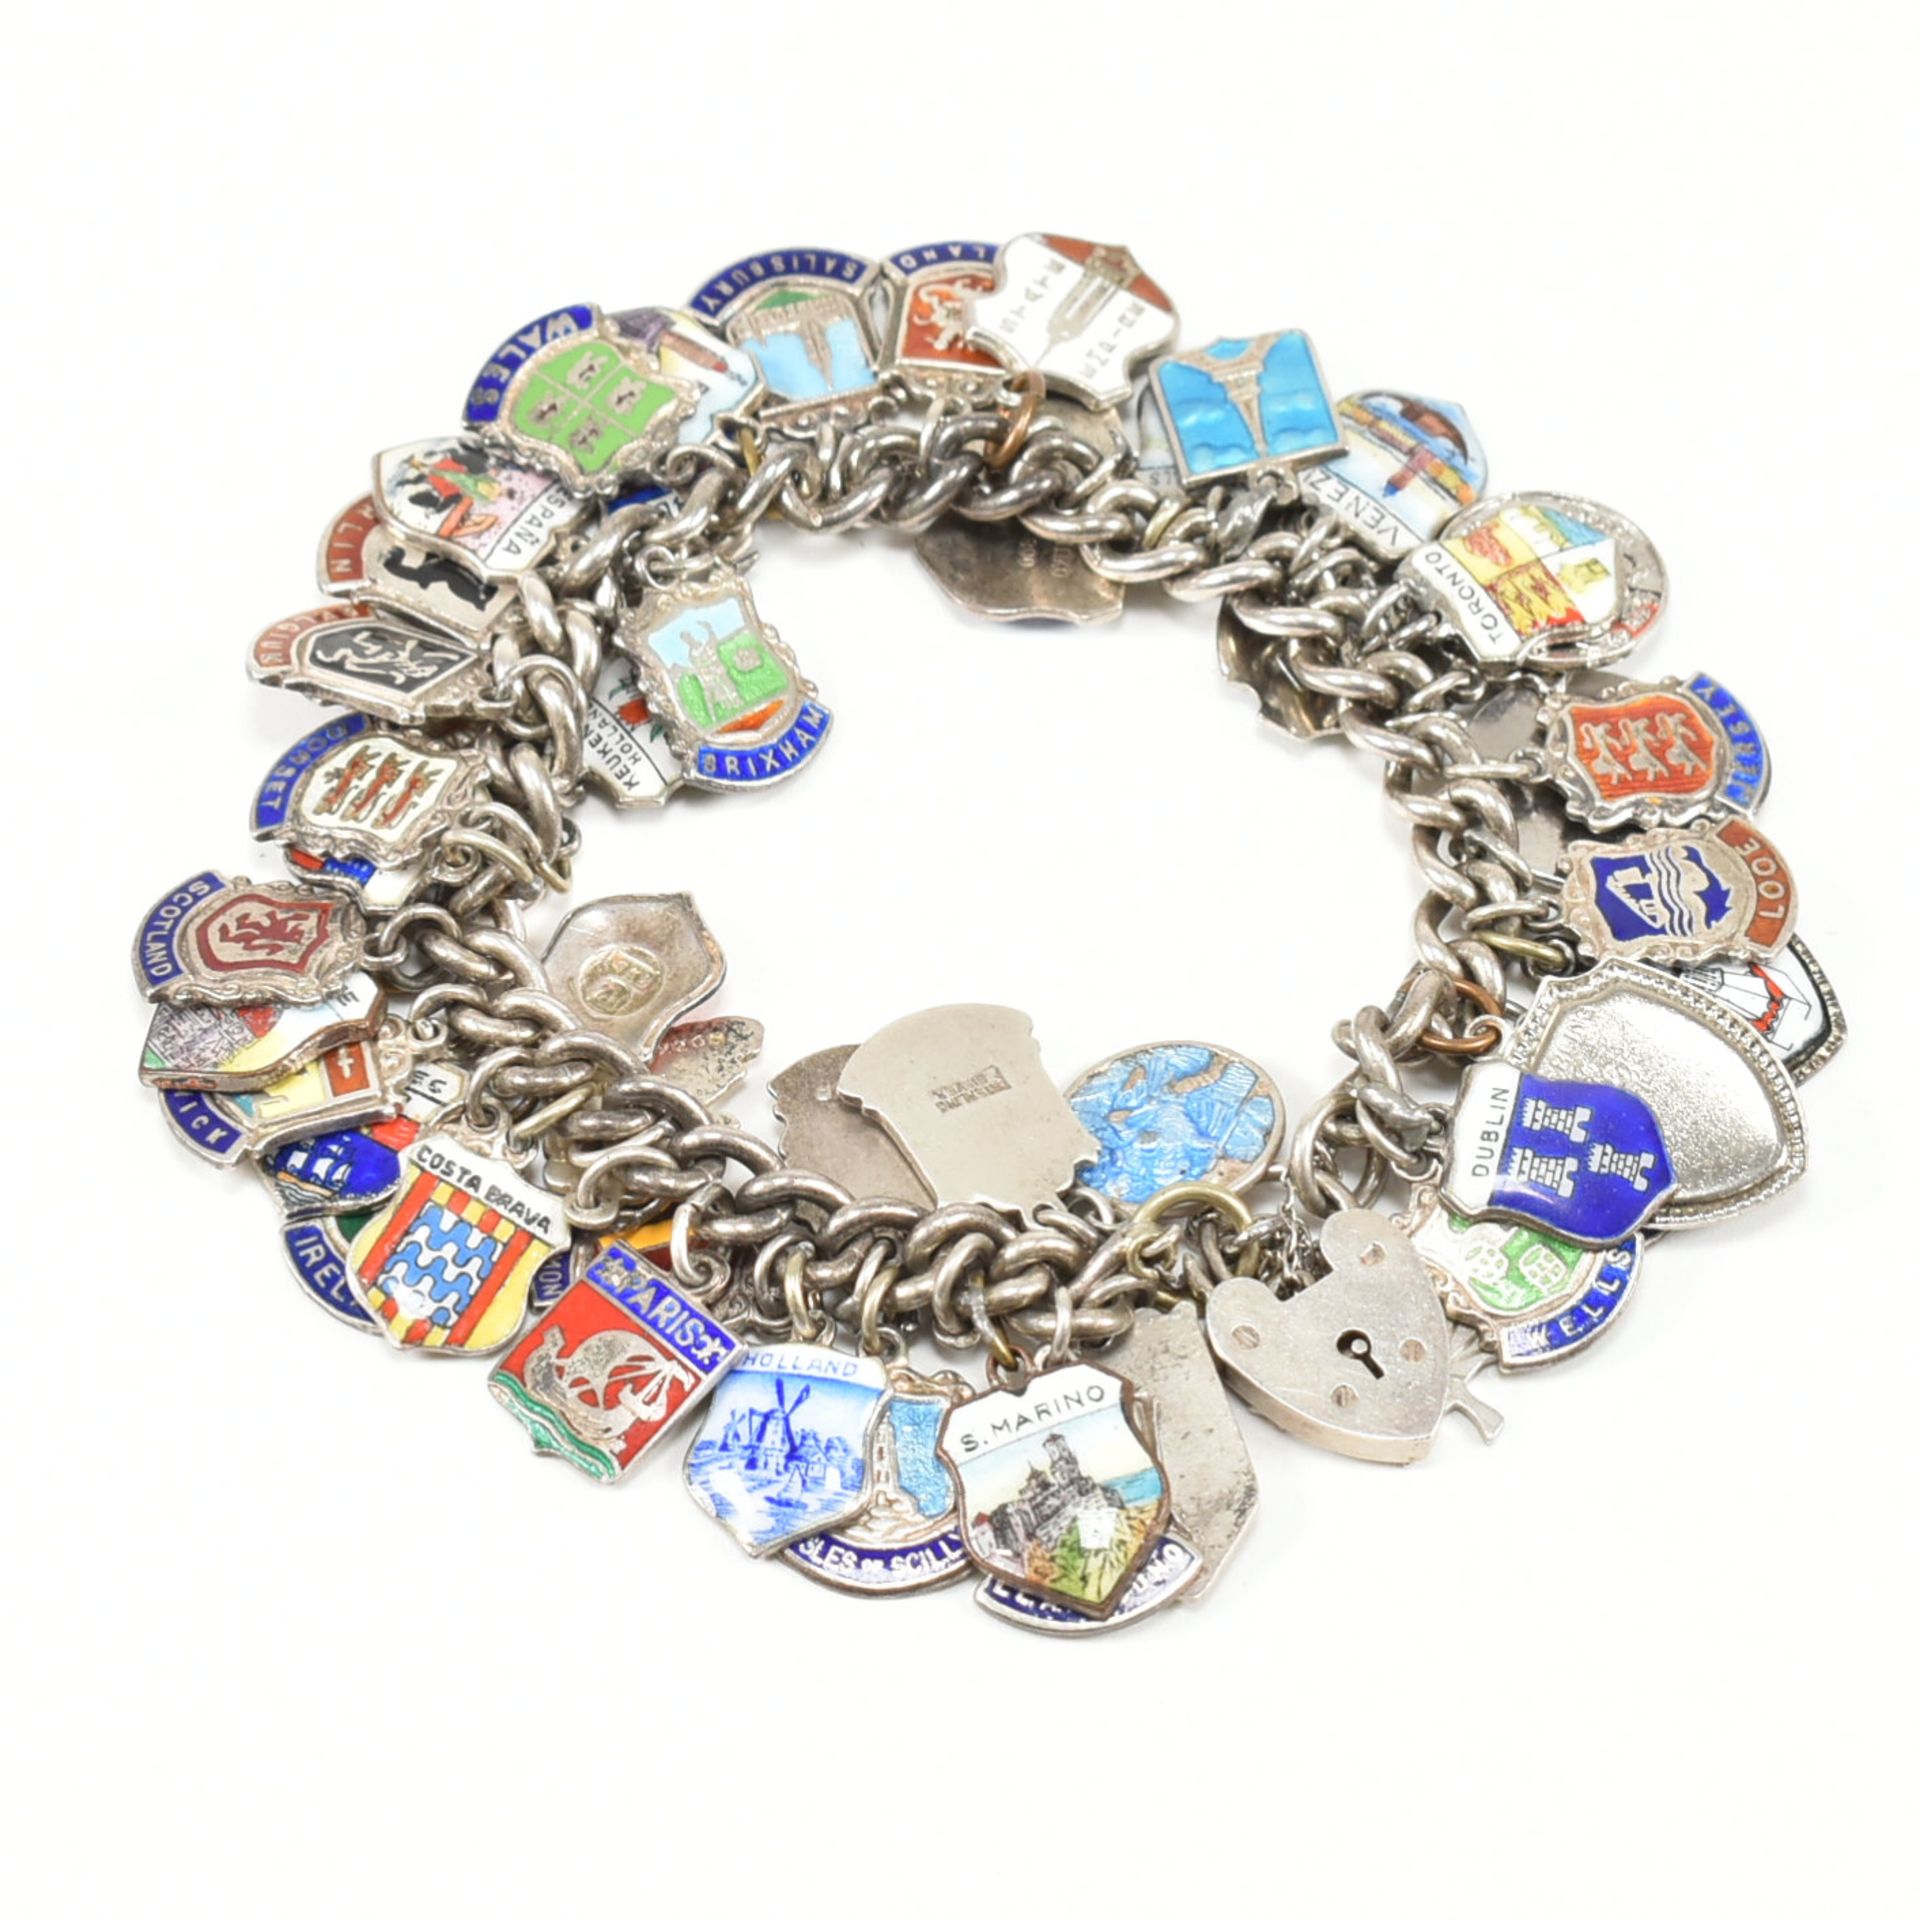 VINTAGE TRAVELLING INTEREST SILVER CHARM BRACELET WITH CHARMS